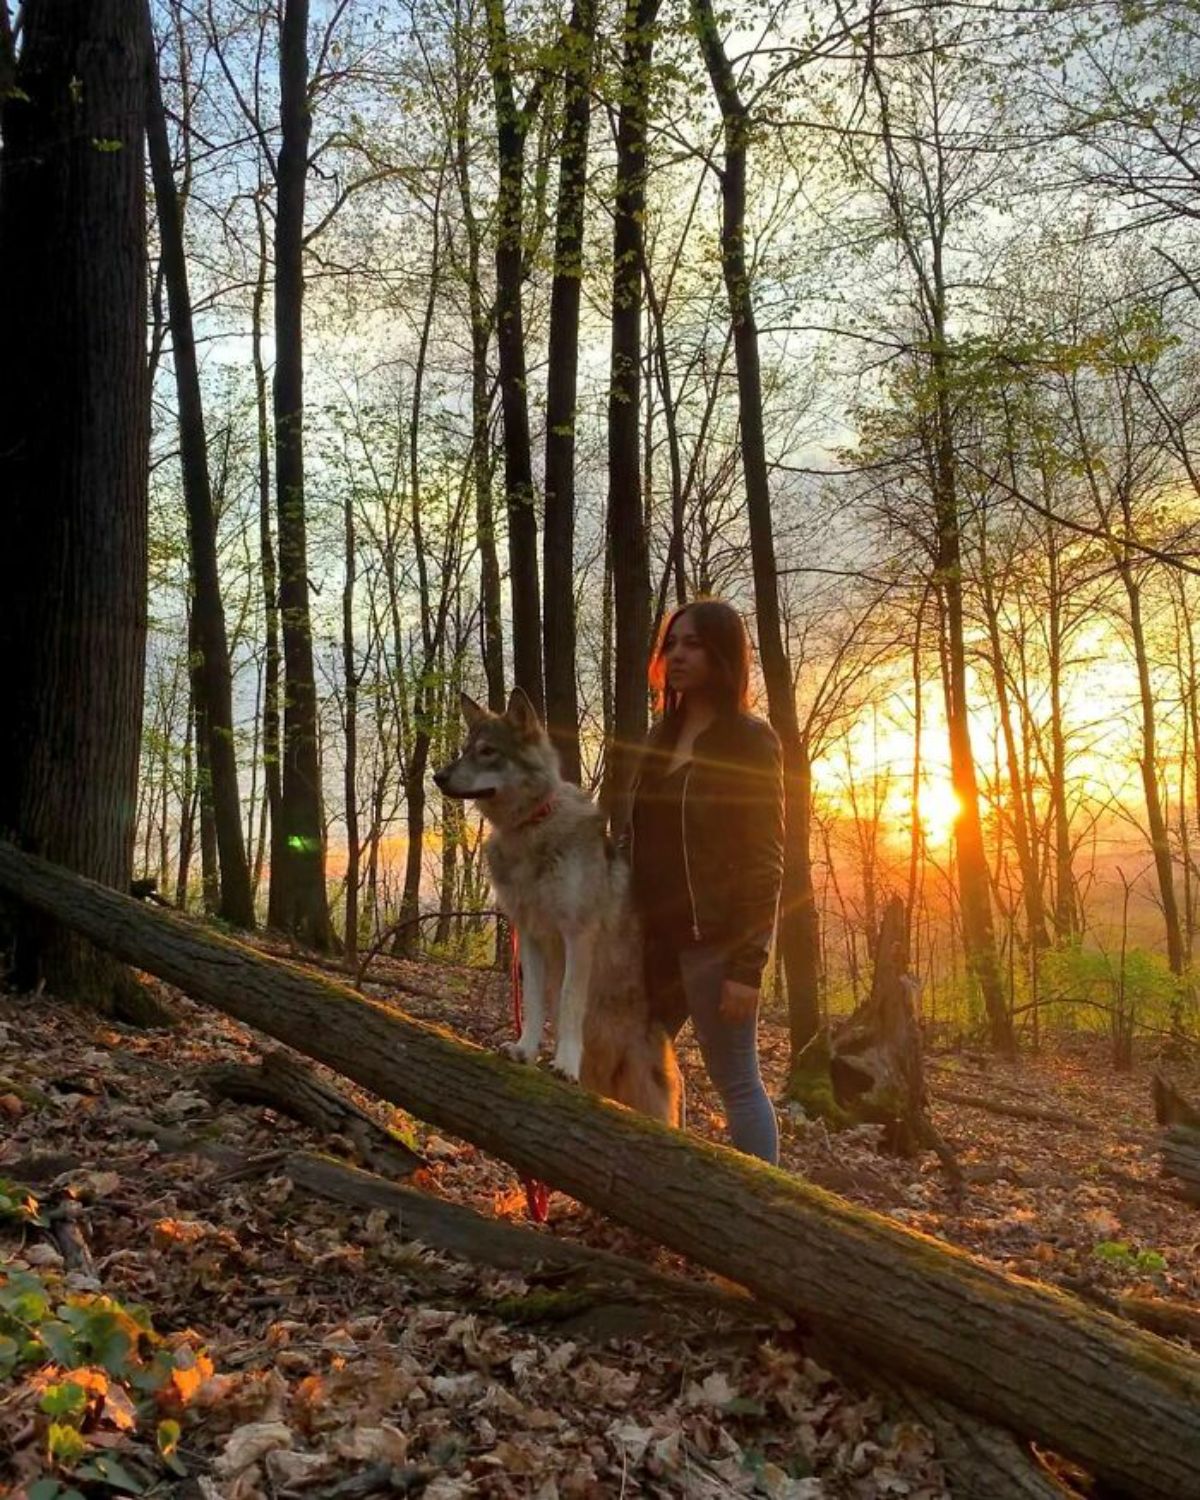 wolf and woman standing by a fallen tree in a forest in the sunset